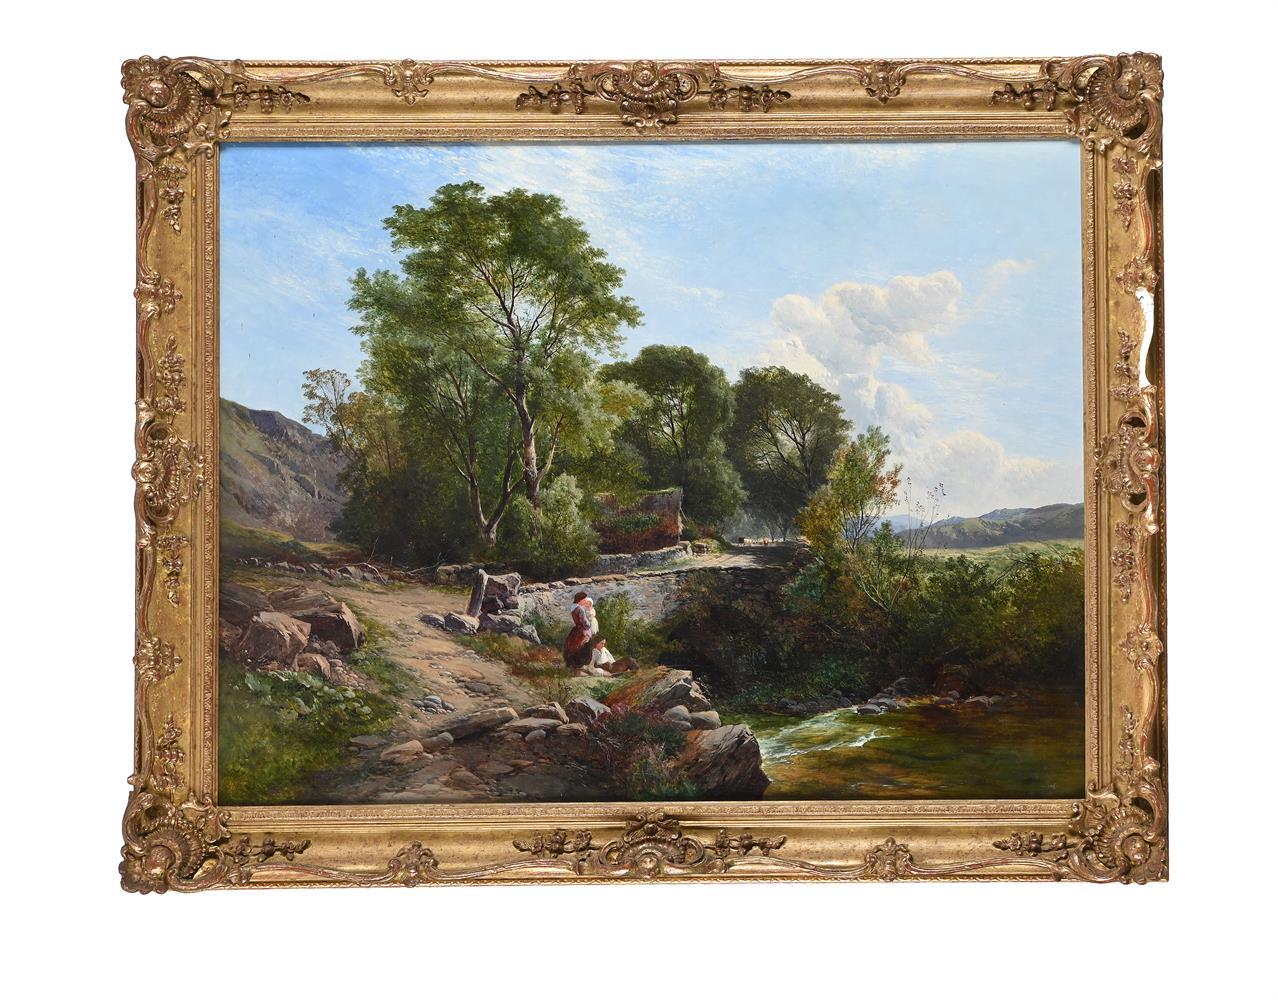 Henry John Boddington Landscape Painting - 19th century English Victorian oil landscape with figures, a stream and trees